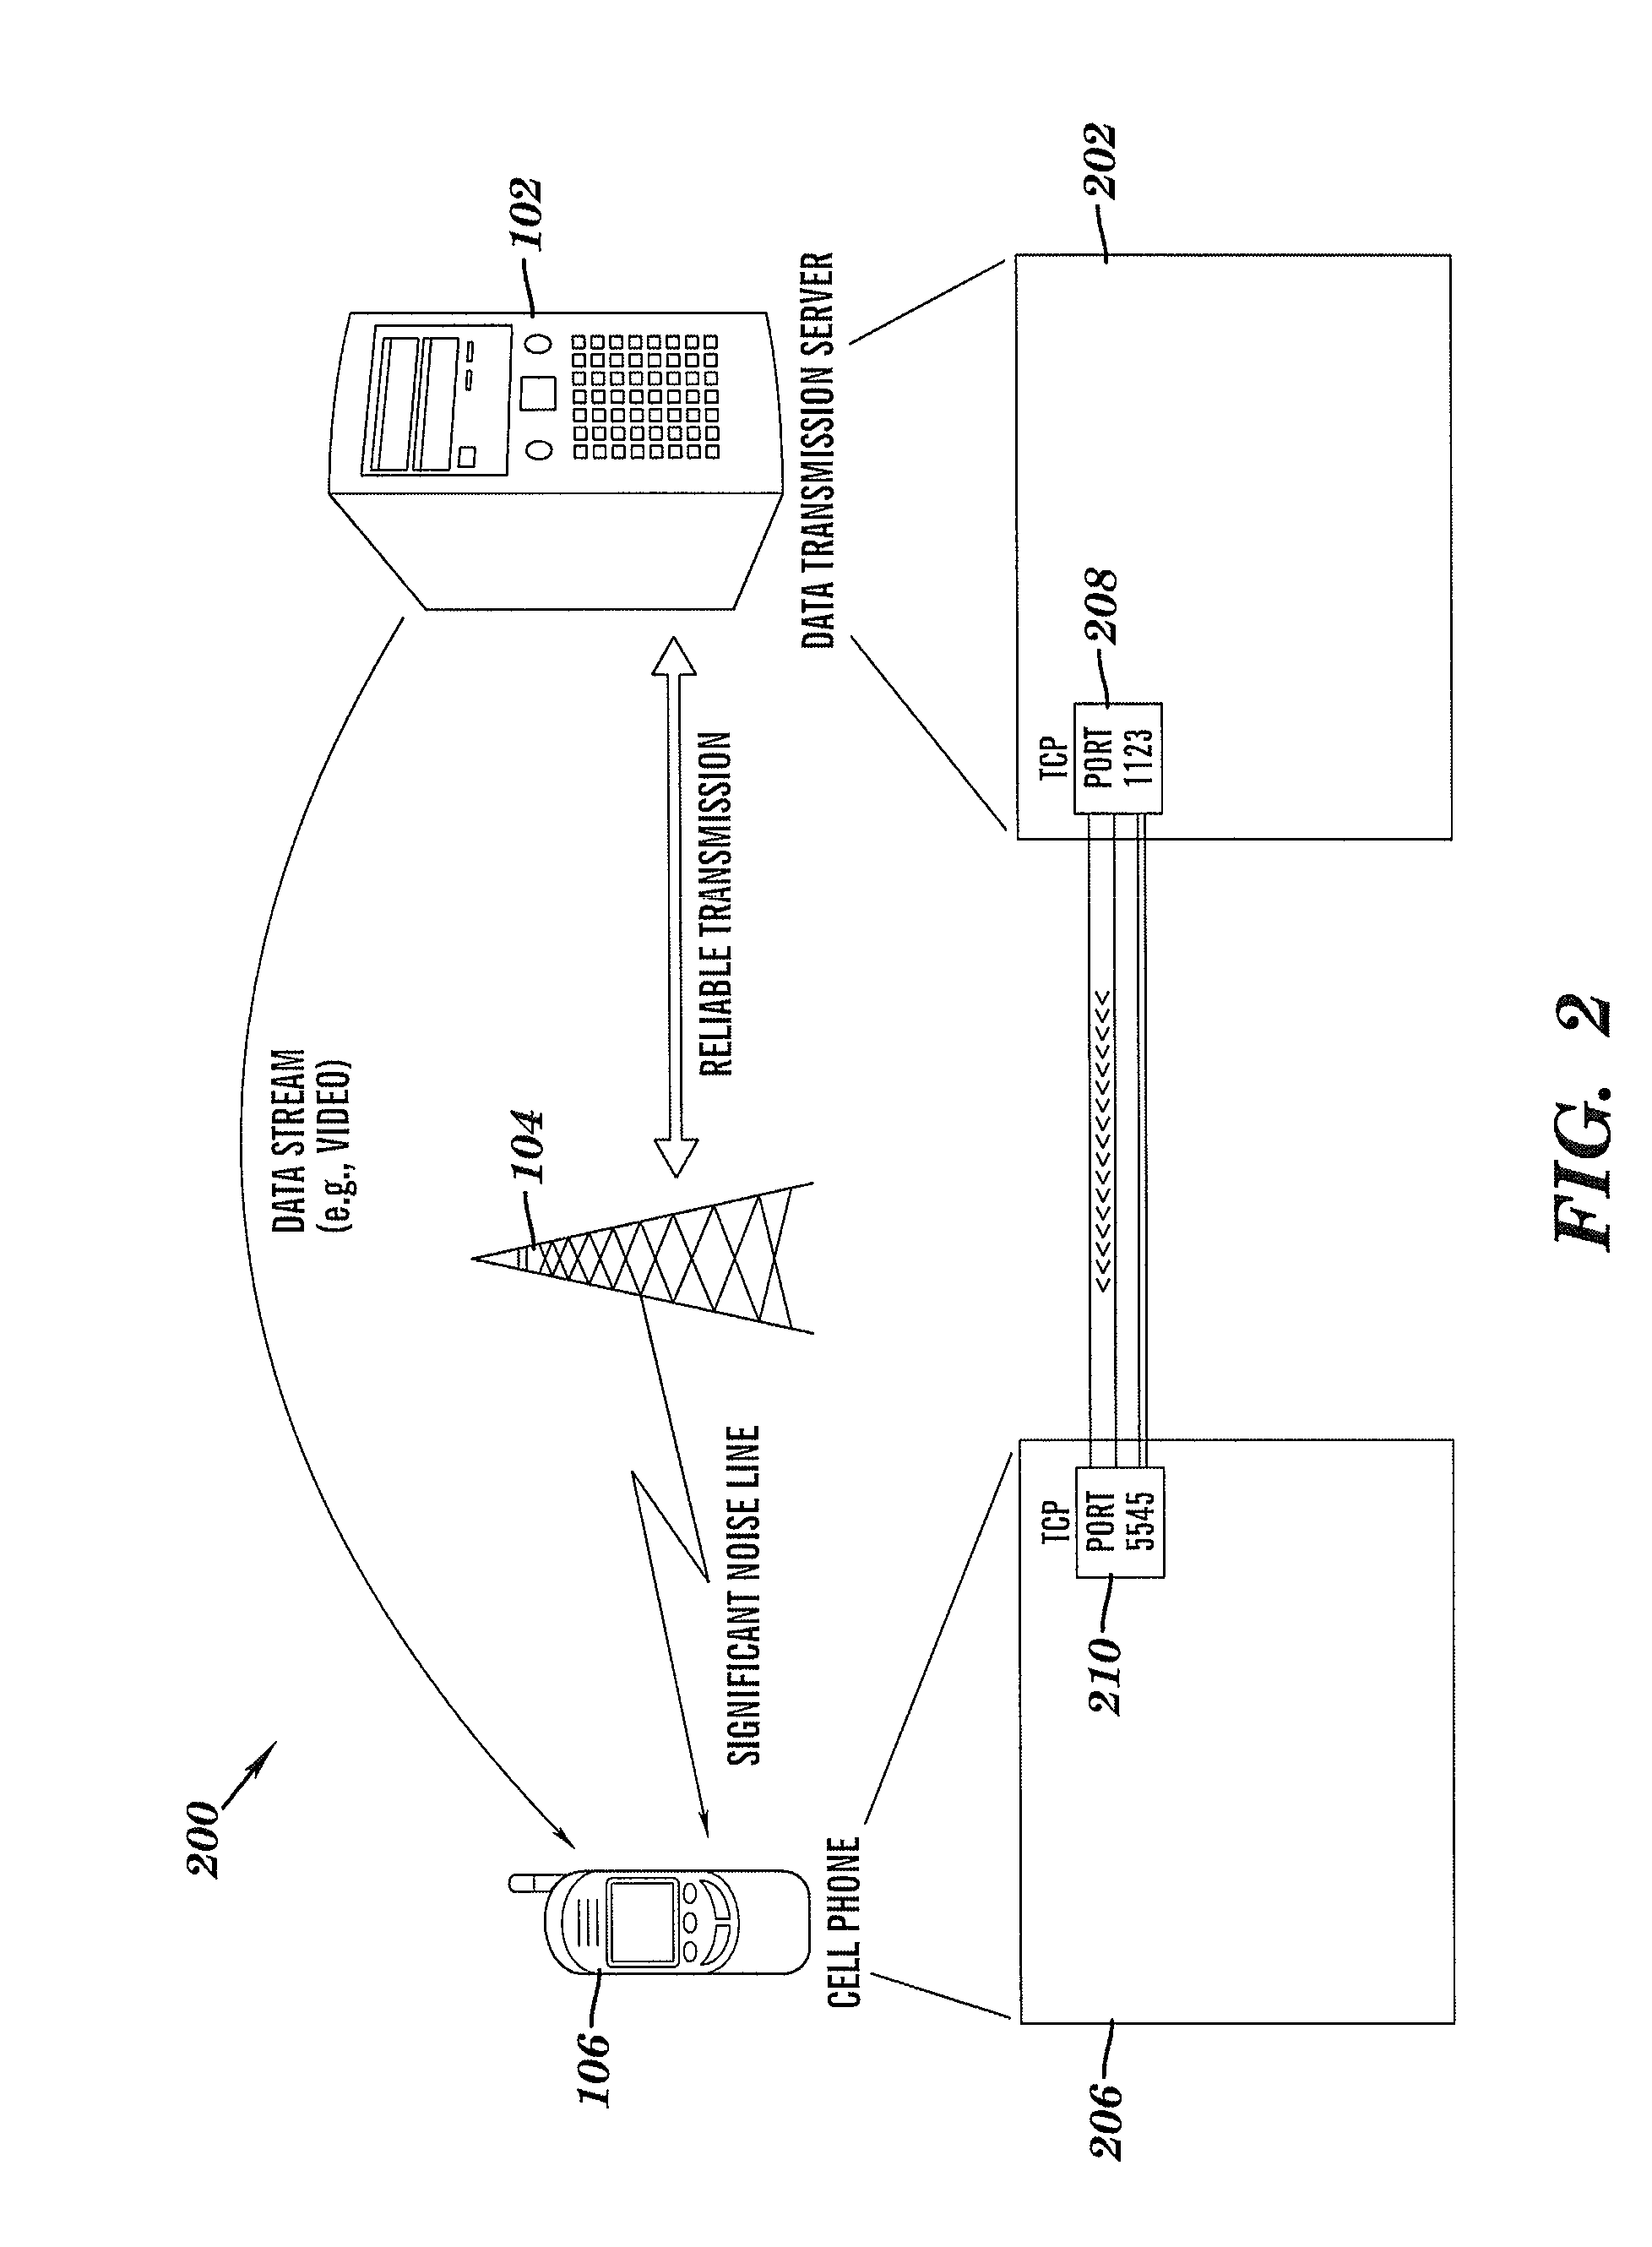 Method and system for dynamically adjusting packet size to decrease delays of streaming data transmissions on noisy transmission lines